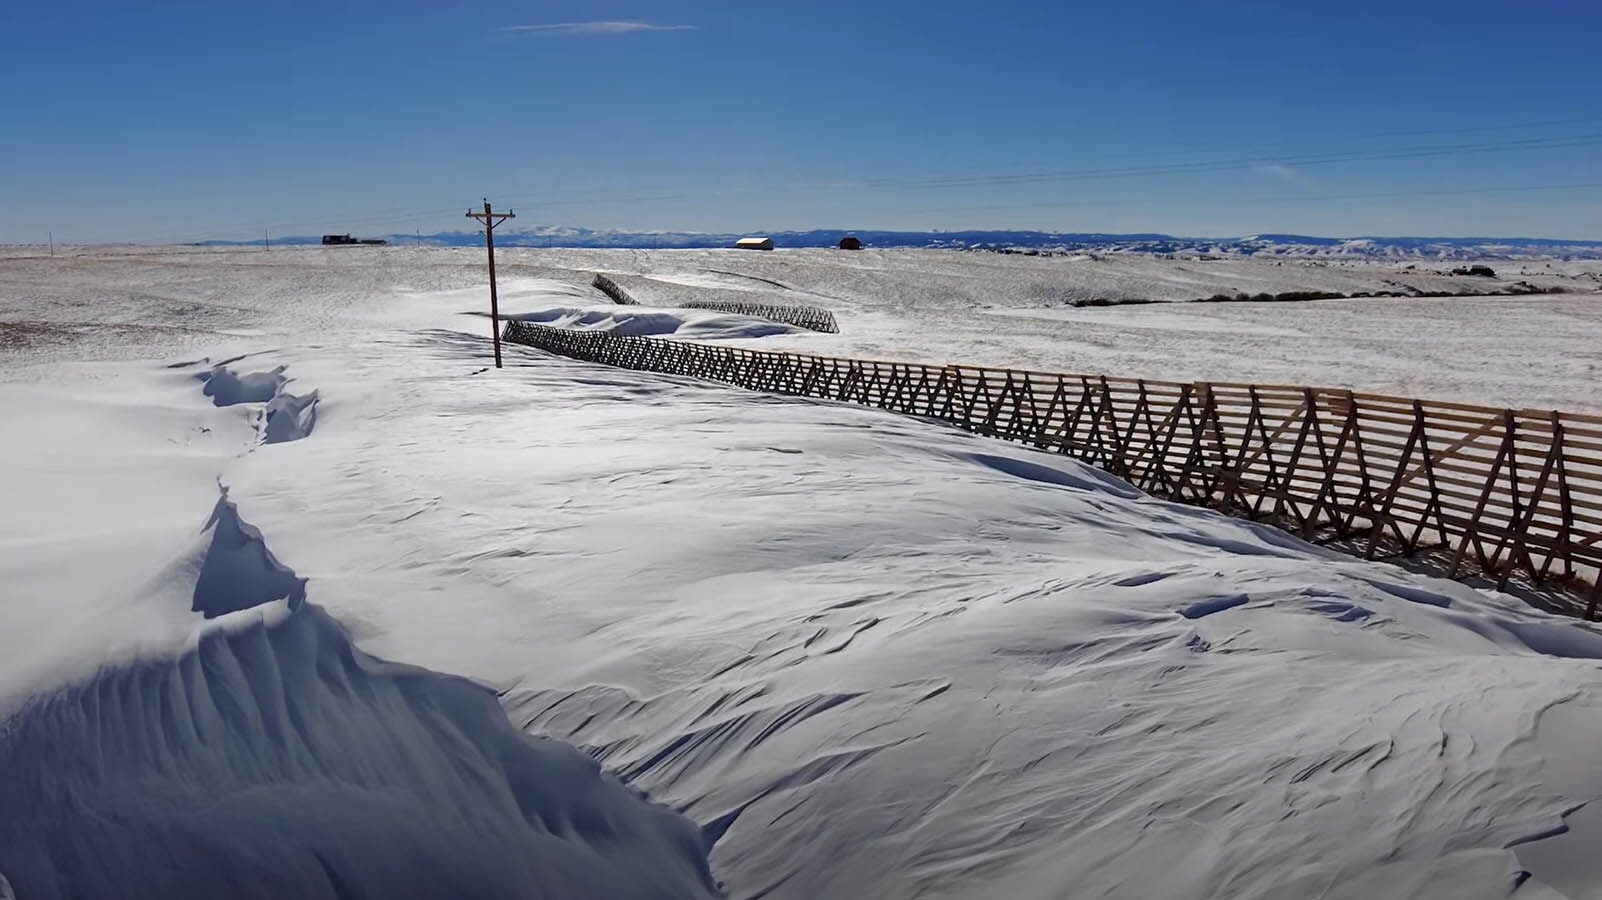 Wyoming's unique winters with its cold, wind and blowing snow, have led to the development of scientific snow mitigation measures like snow fences.